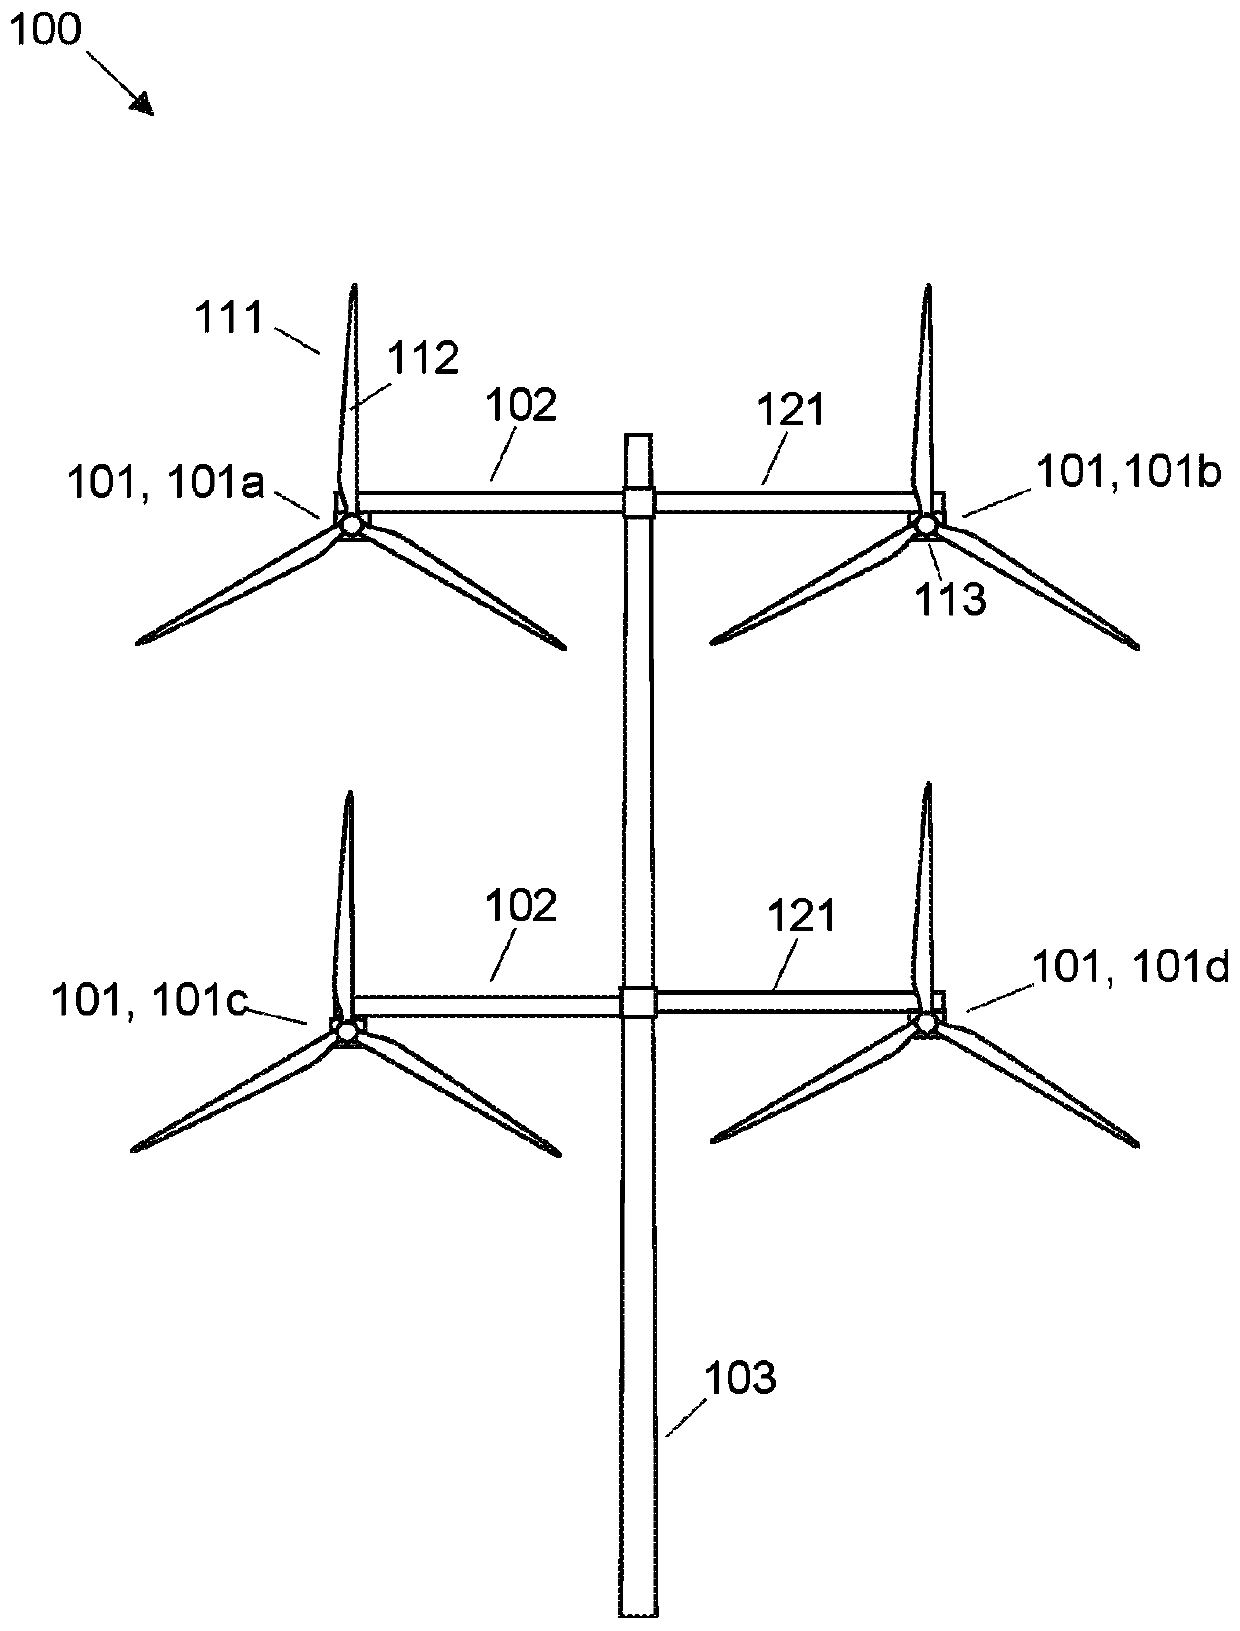 Performance monitoring of a multi-rotor wind turbine system